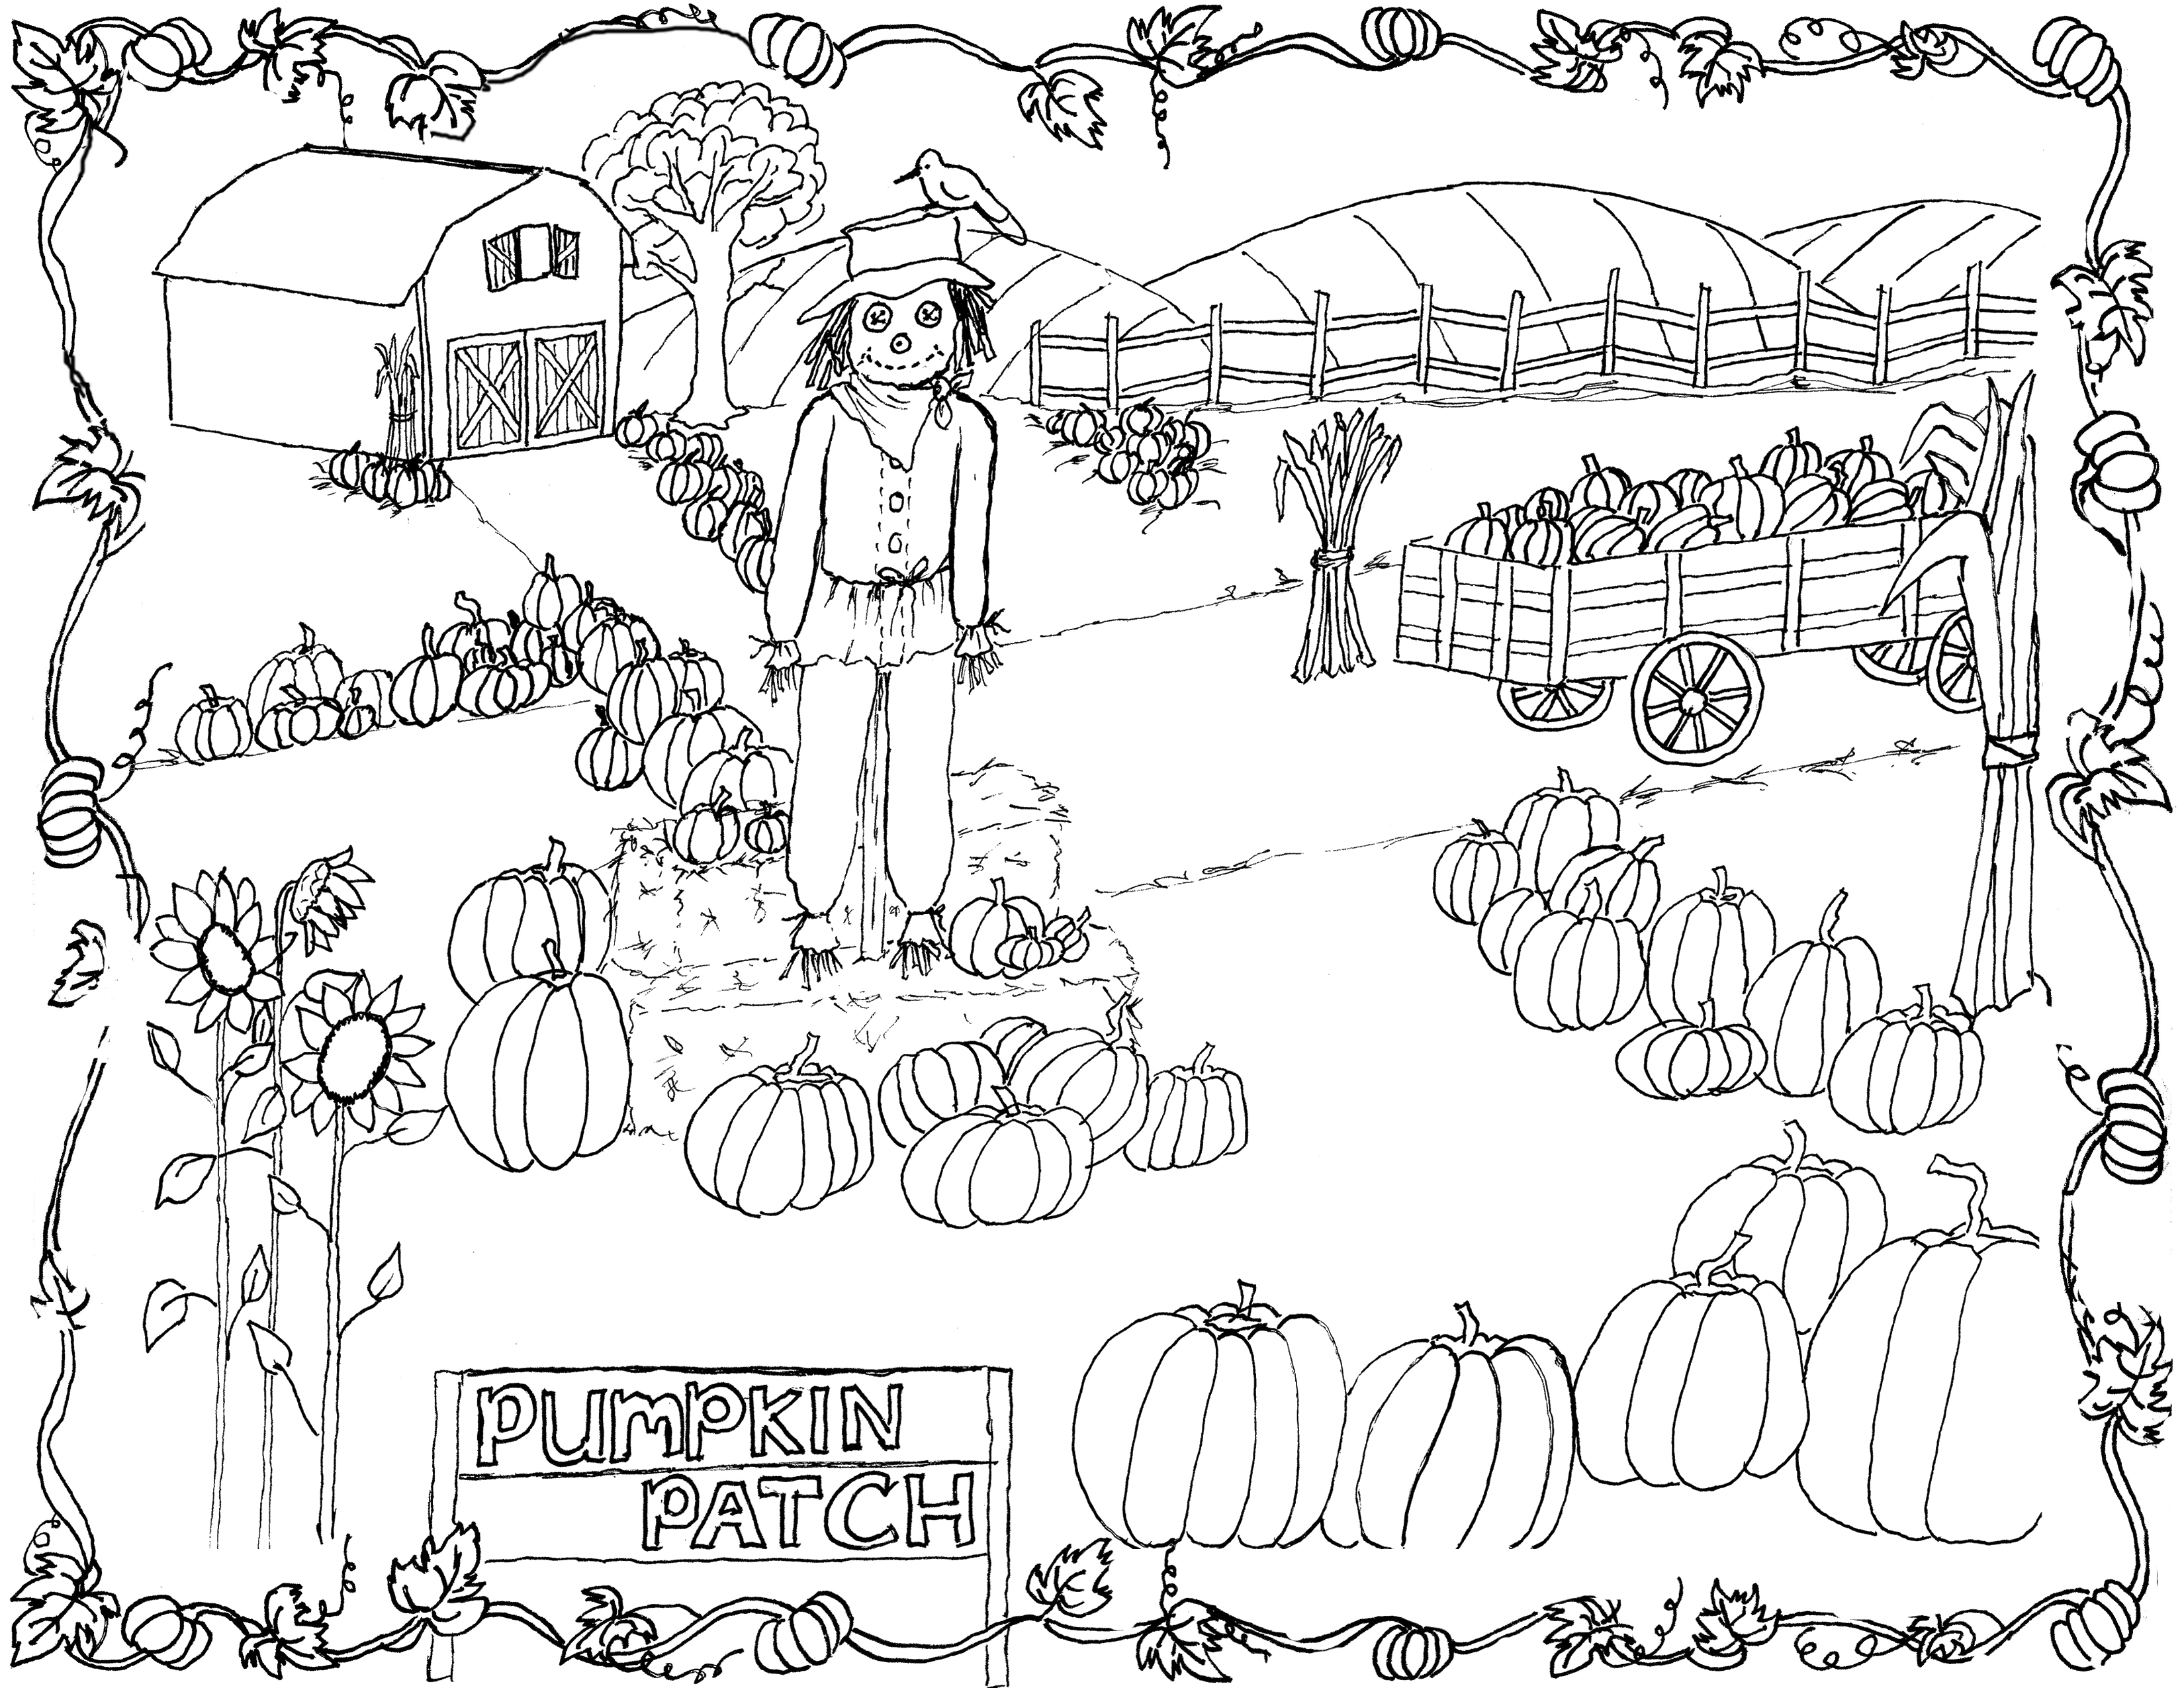 pumpkin coloring pages free printable pattern pumpkin coloring page by creativity in connecticut free coloring pumpkin pages printable 